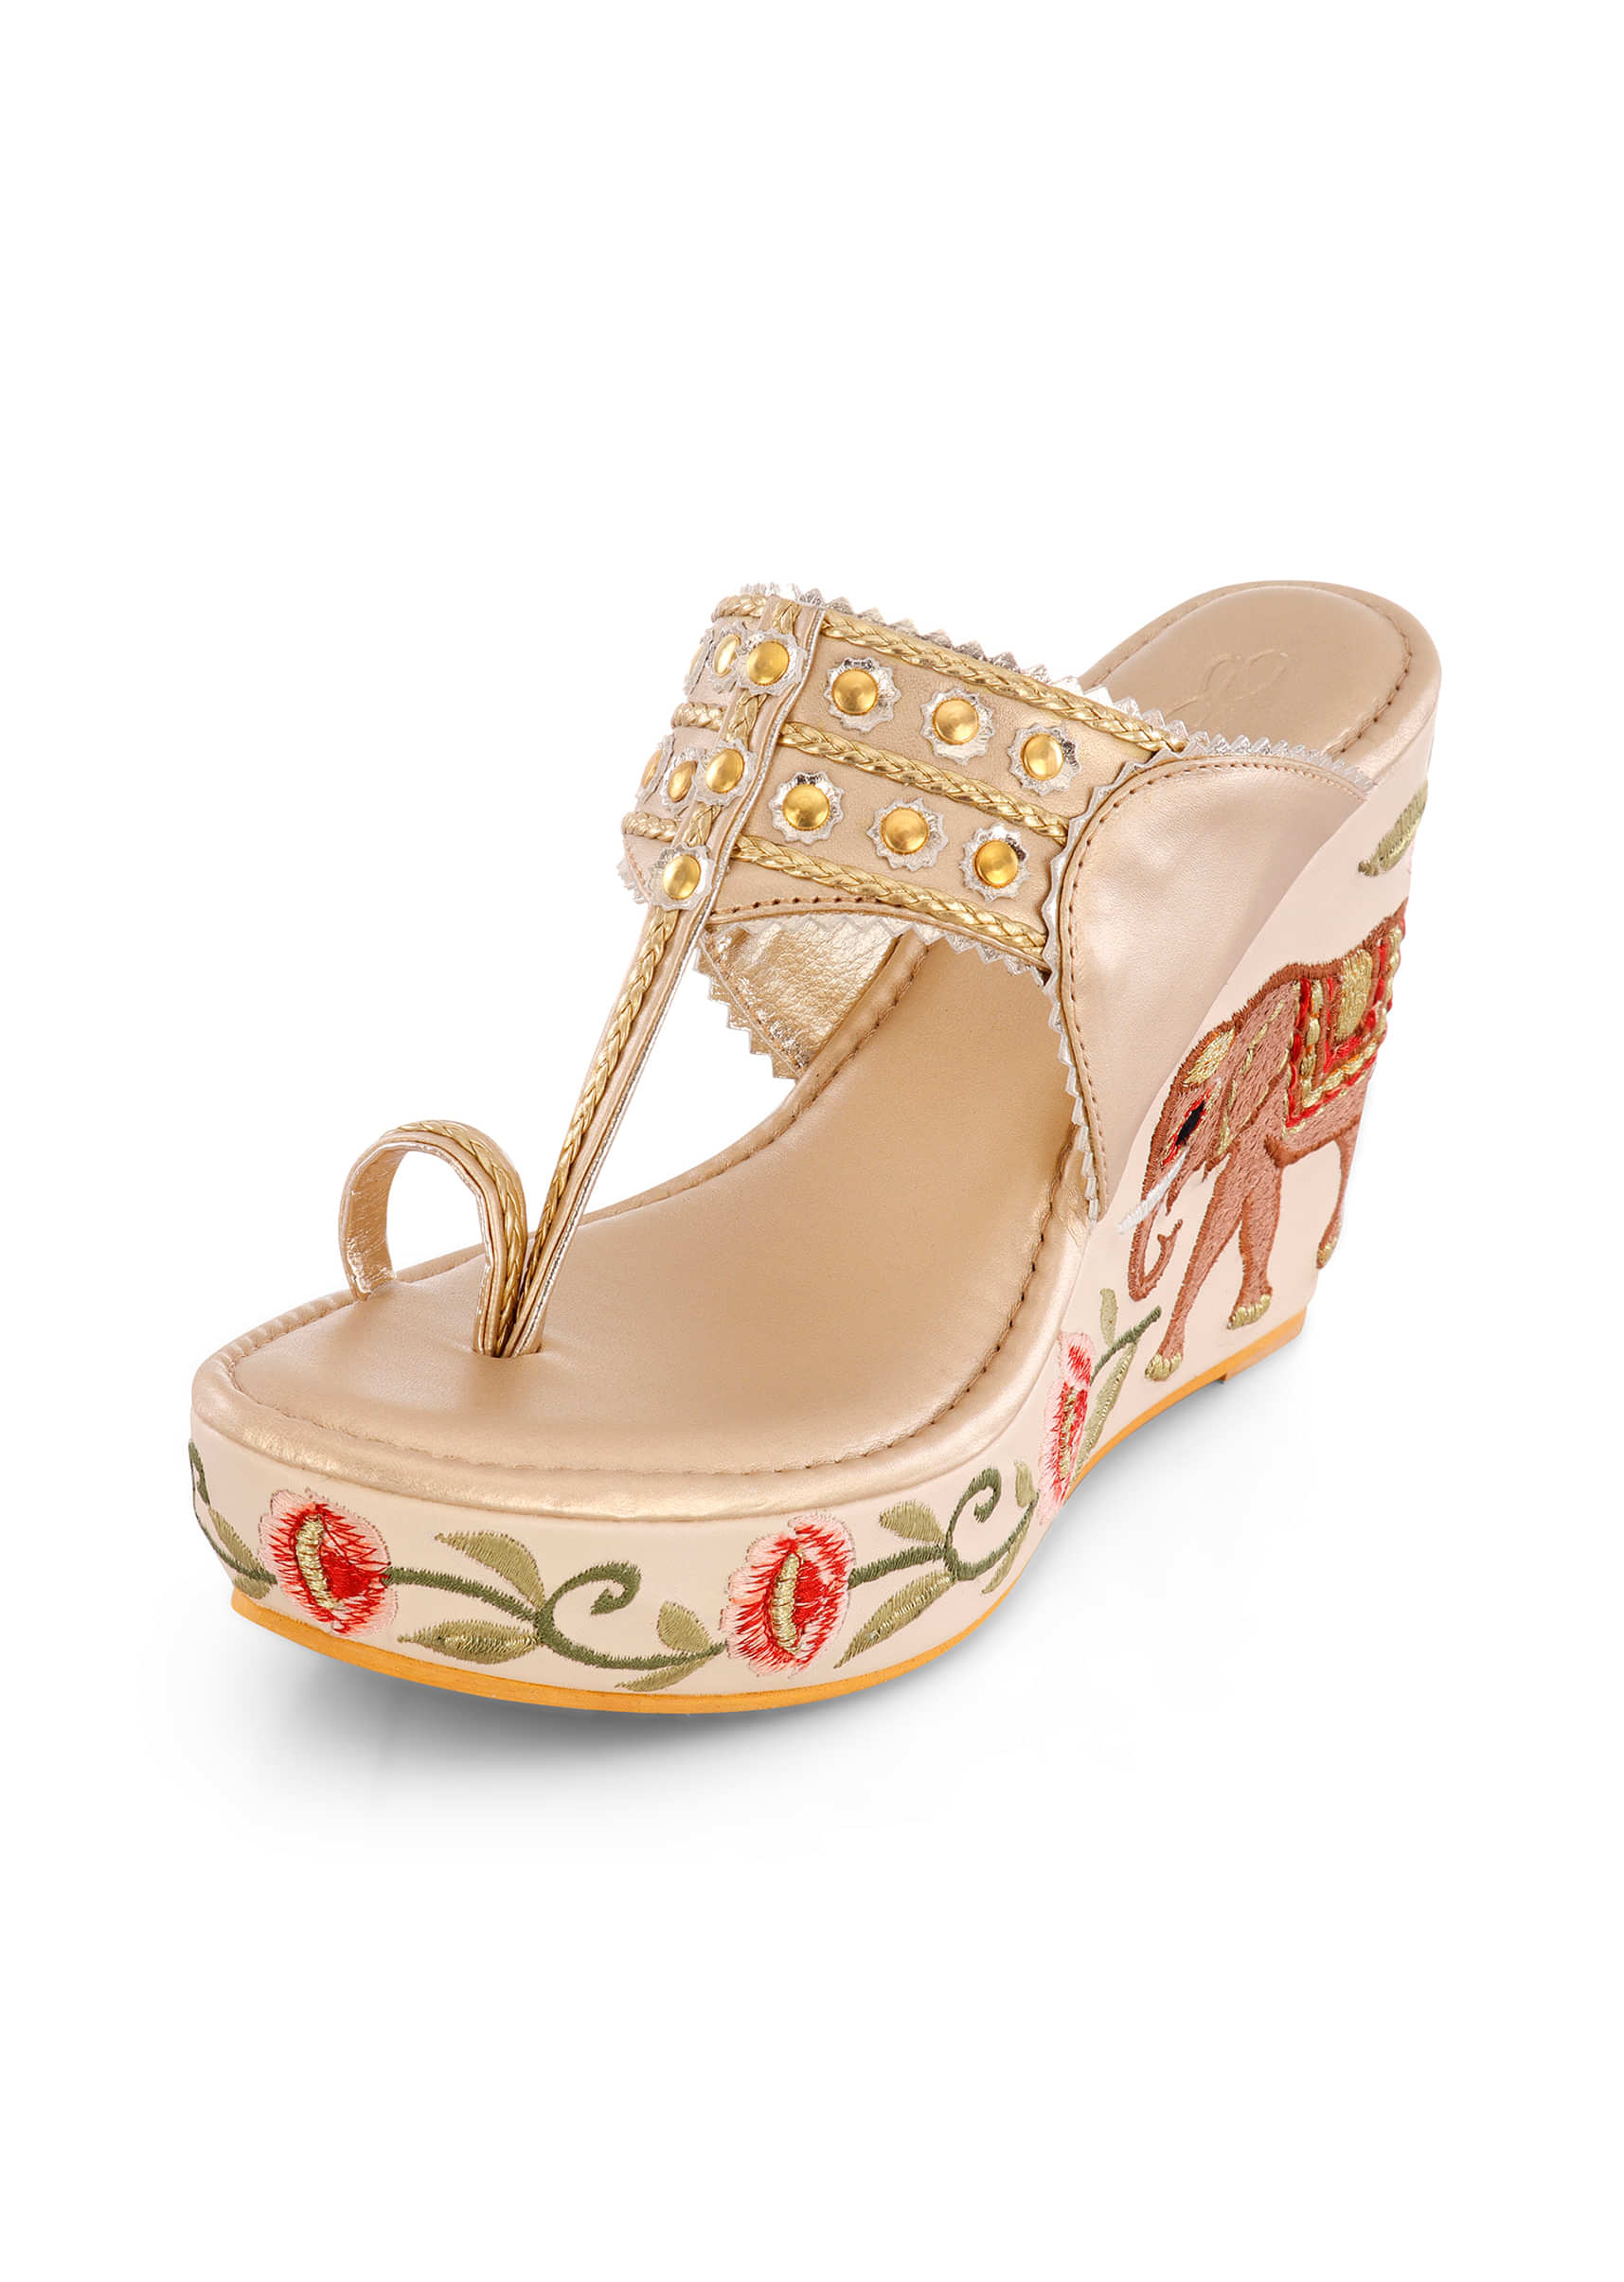 Buy Multi-Colored Royal 4-Incha Kolhapuri Wedges With Embroidered Flowers